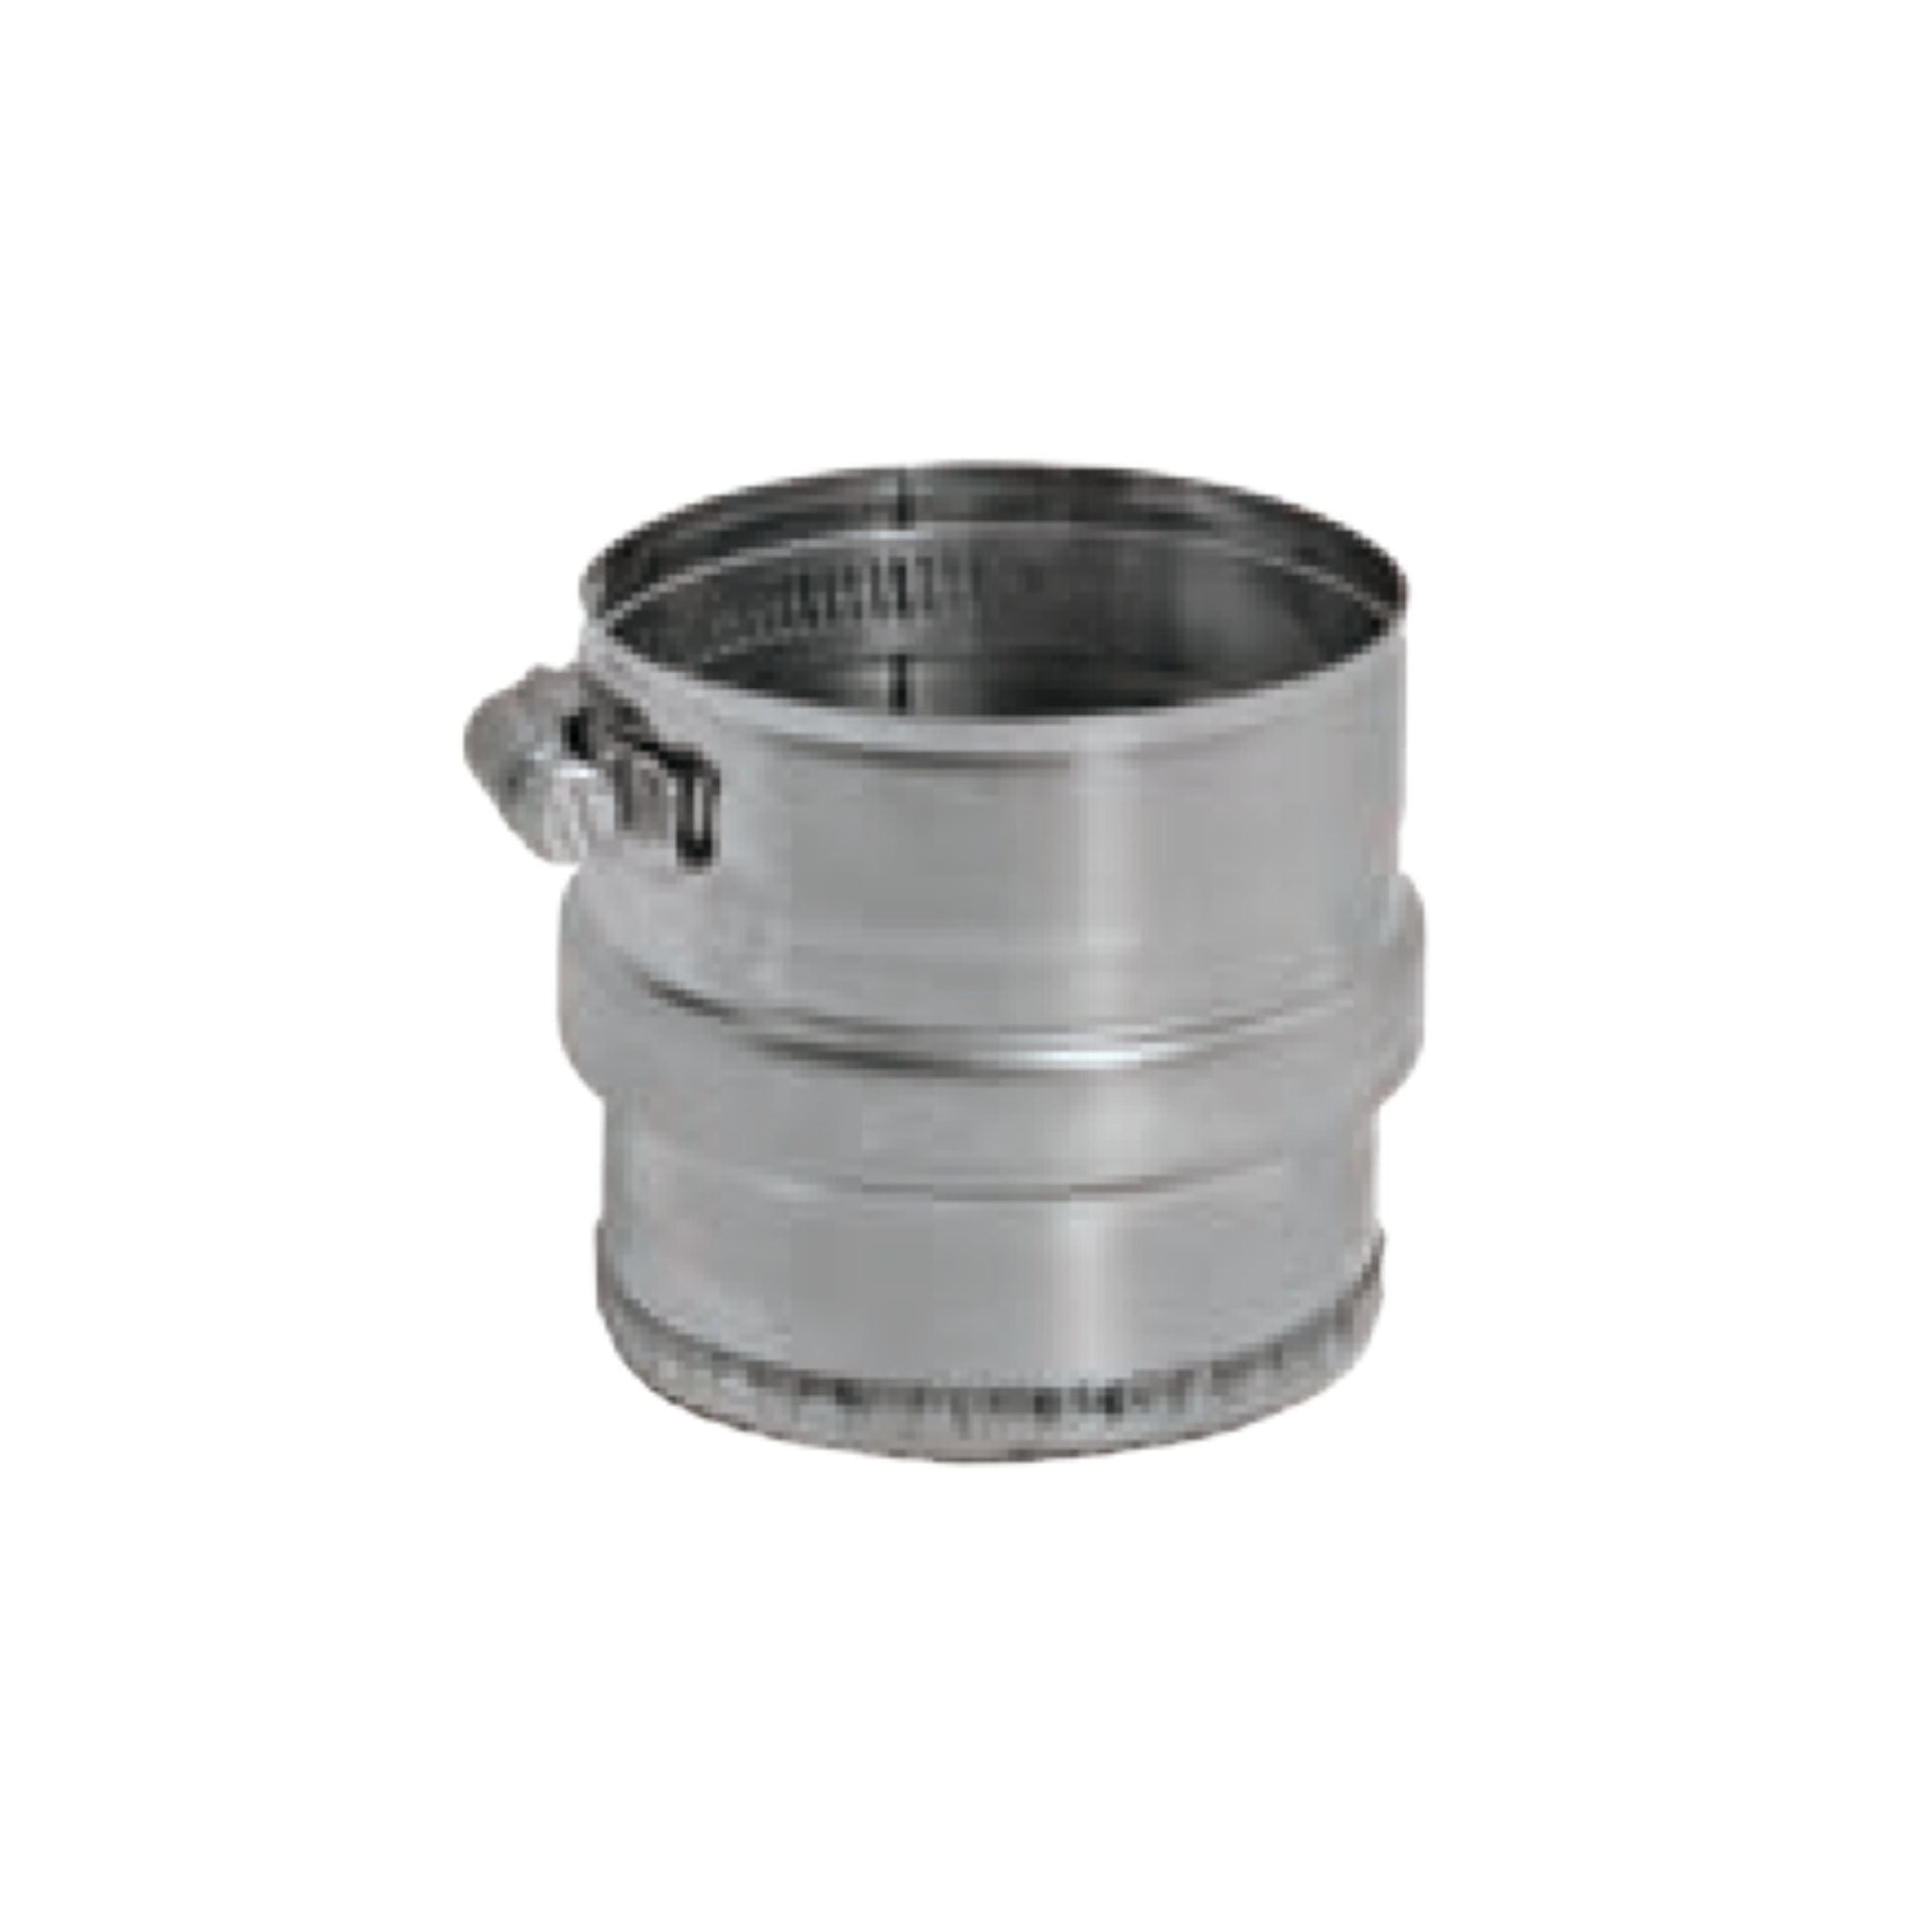 DuraVent FasNSeal 5" 29-4C Stainless Steel Tee Cap